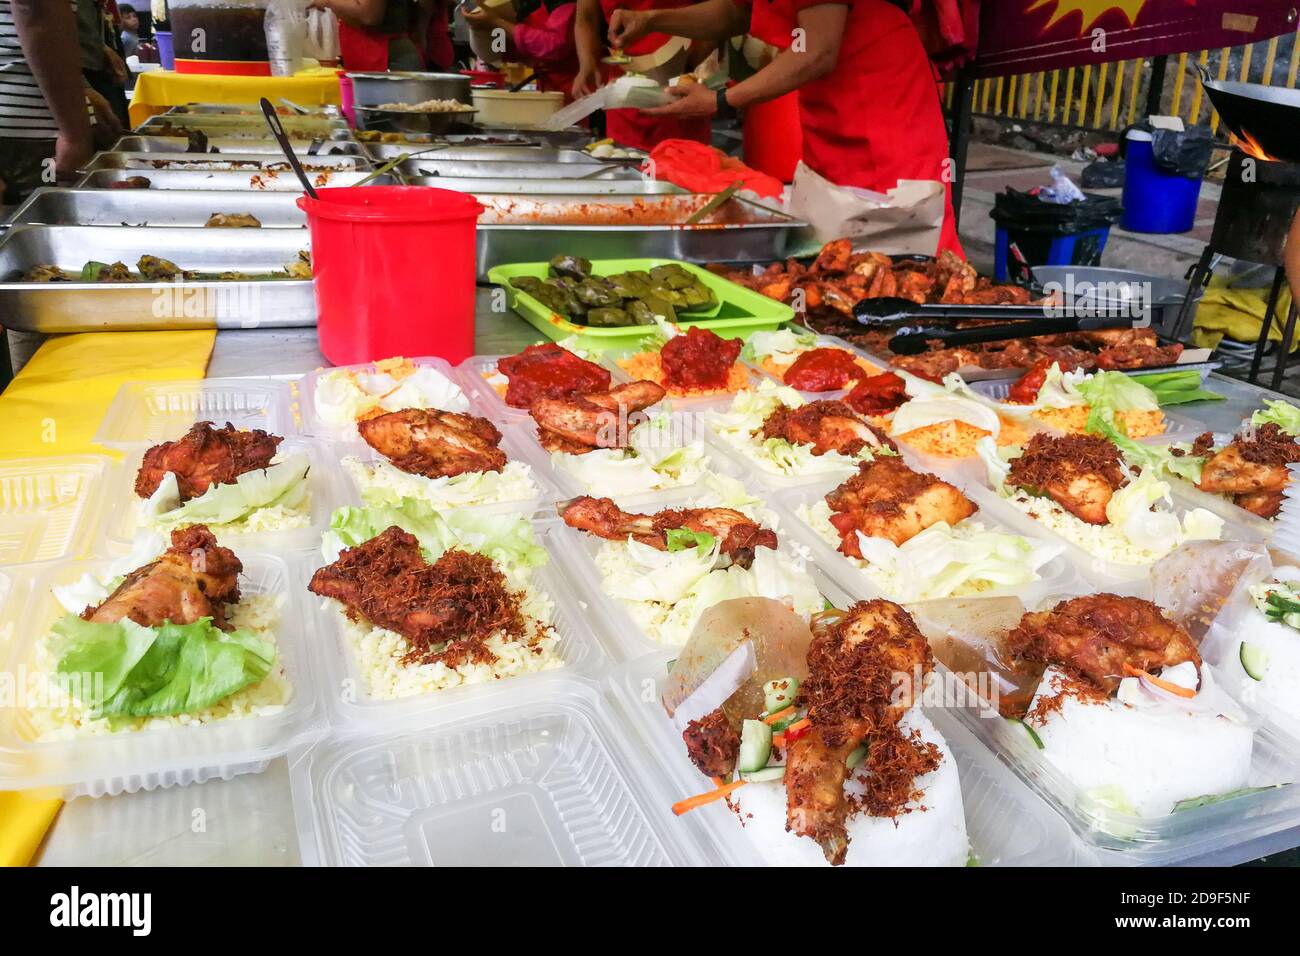 Meals sold at market stall in Malaysia during Ramadan month. Stock Photo